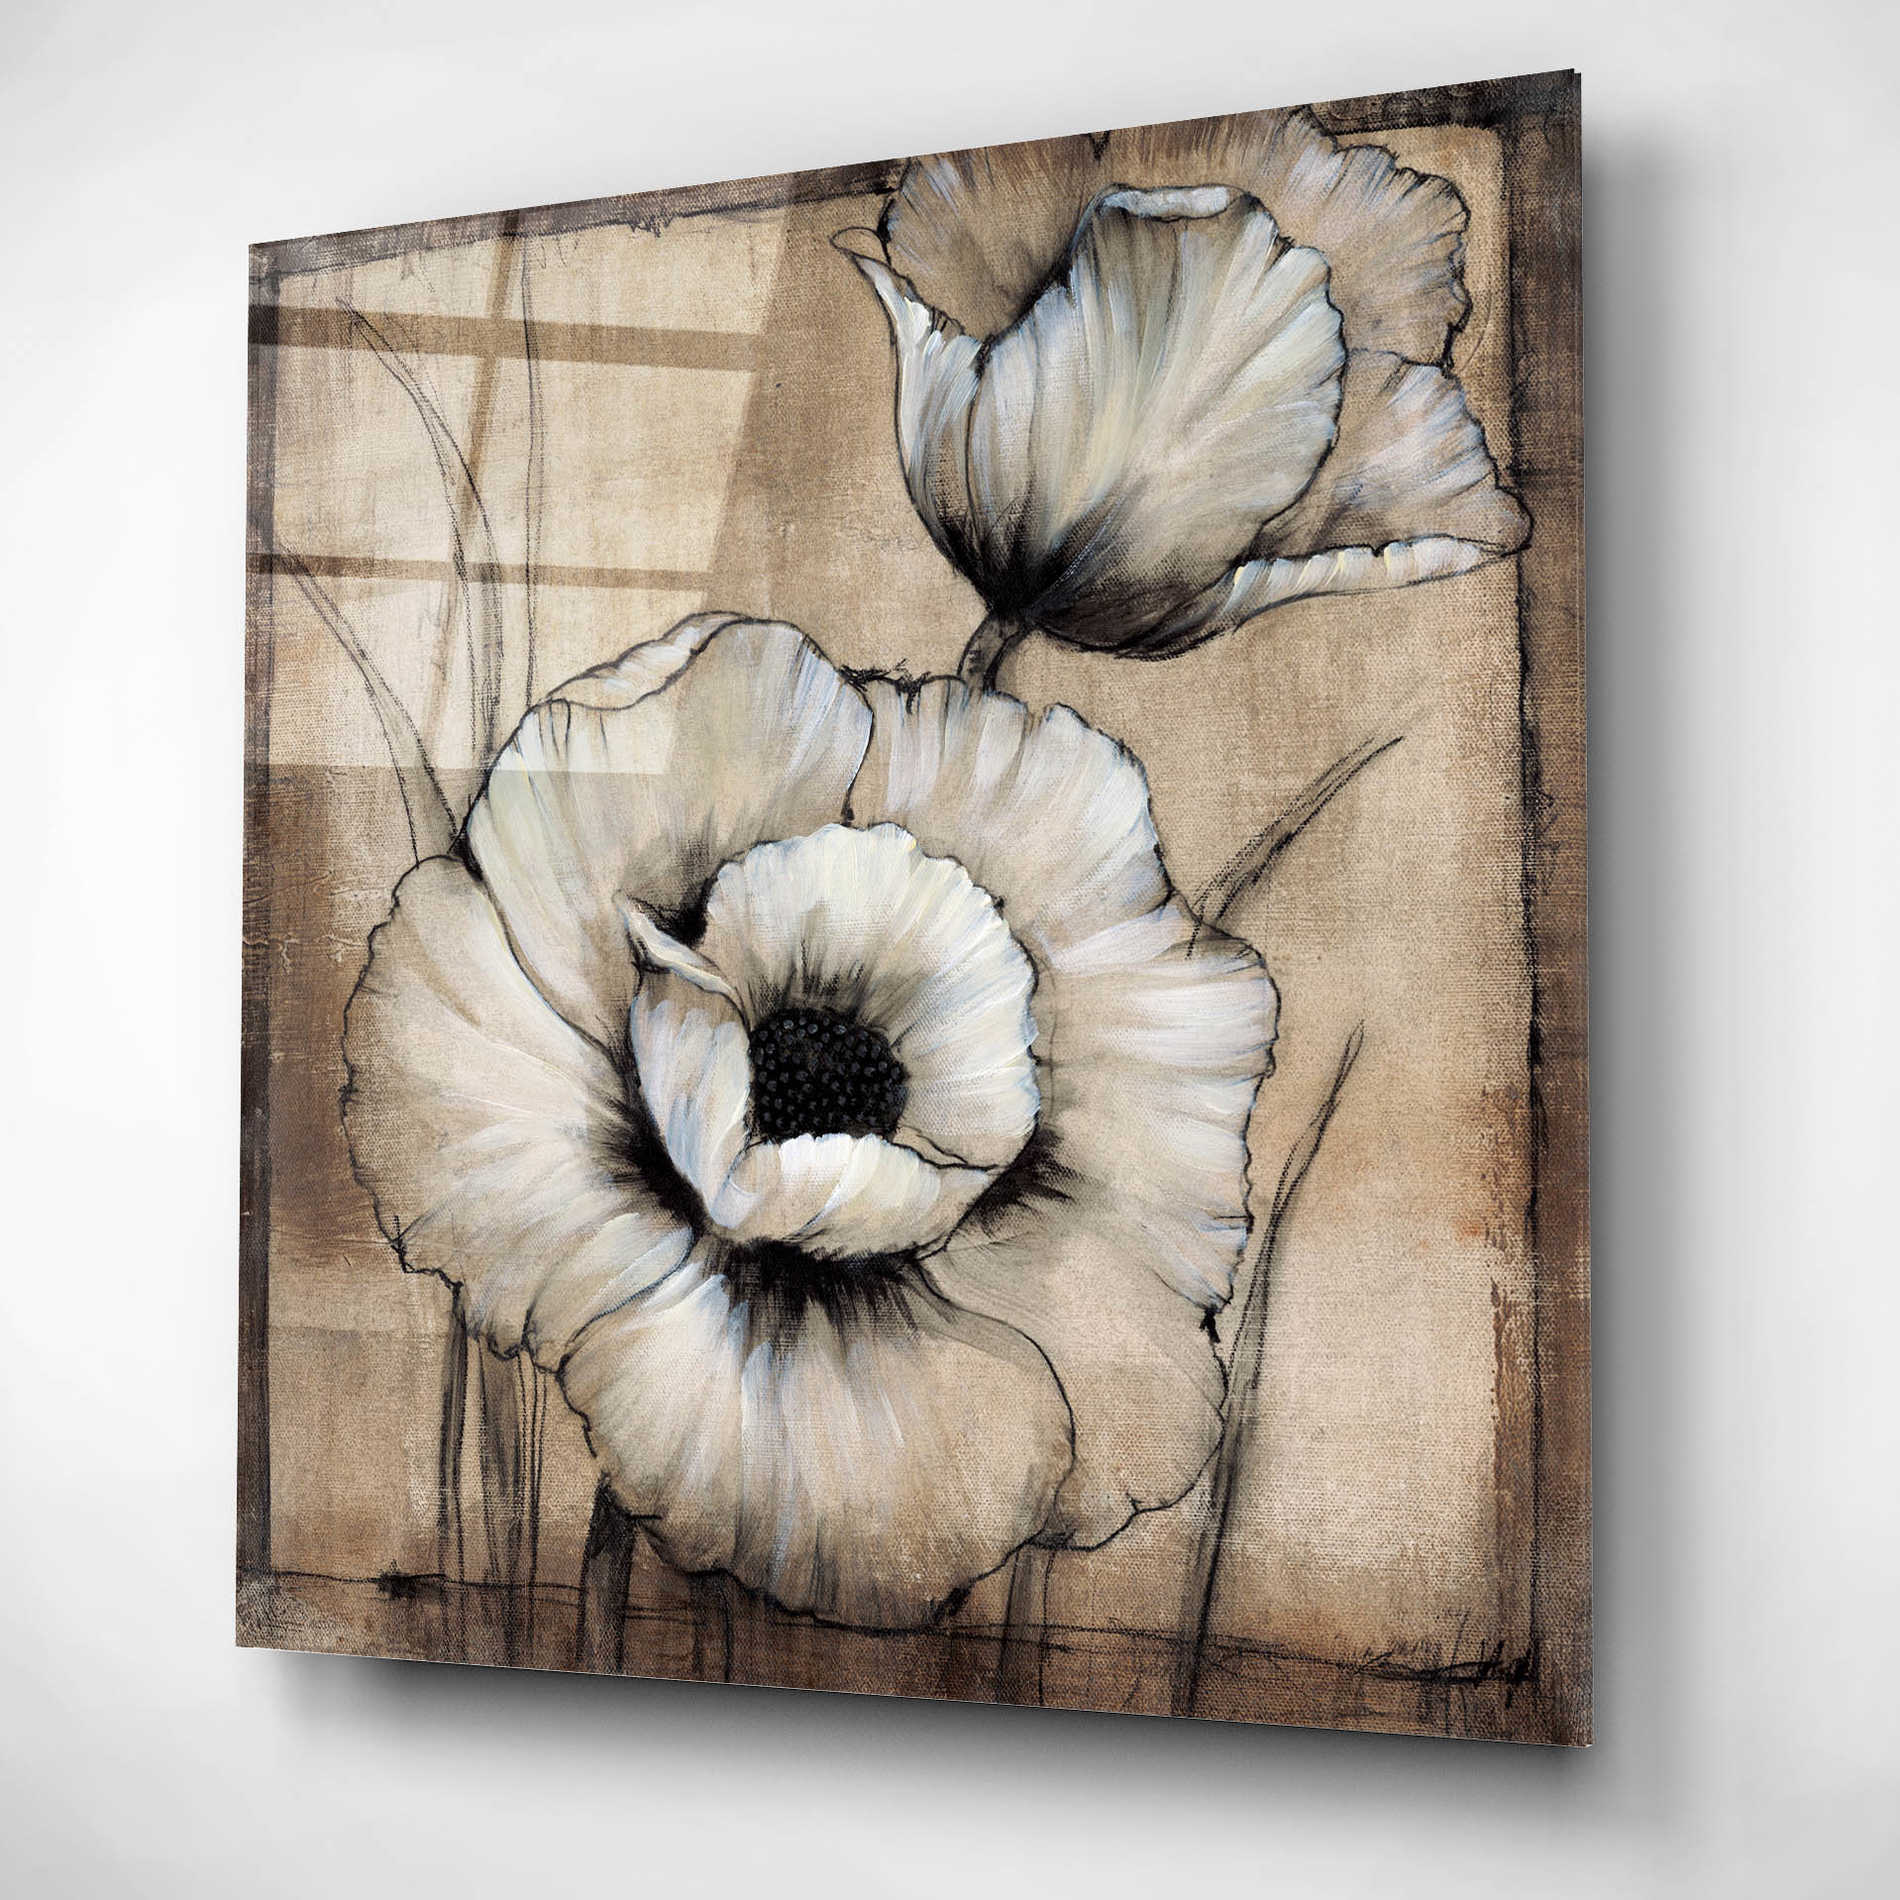 Epic Art 'Neutral Poppies I' by Tim O'Toole, Acrylic Glass Wall Art,12x12